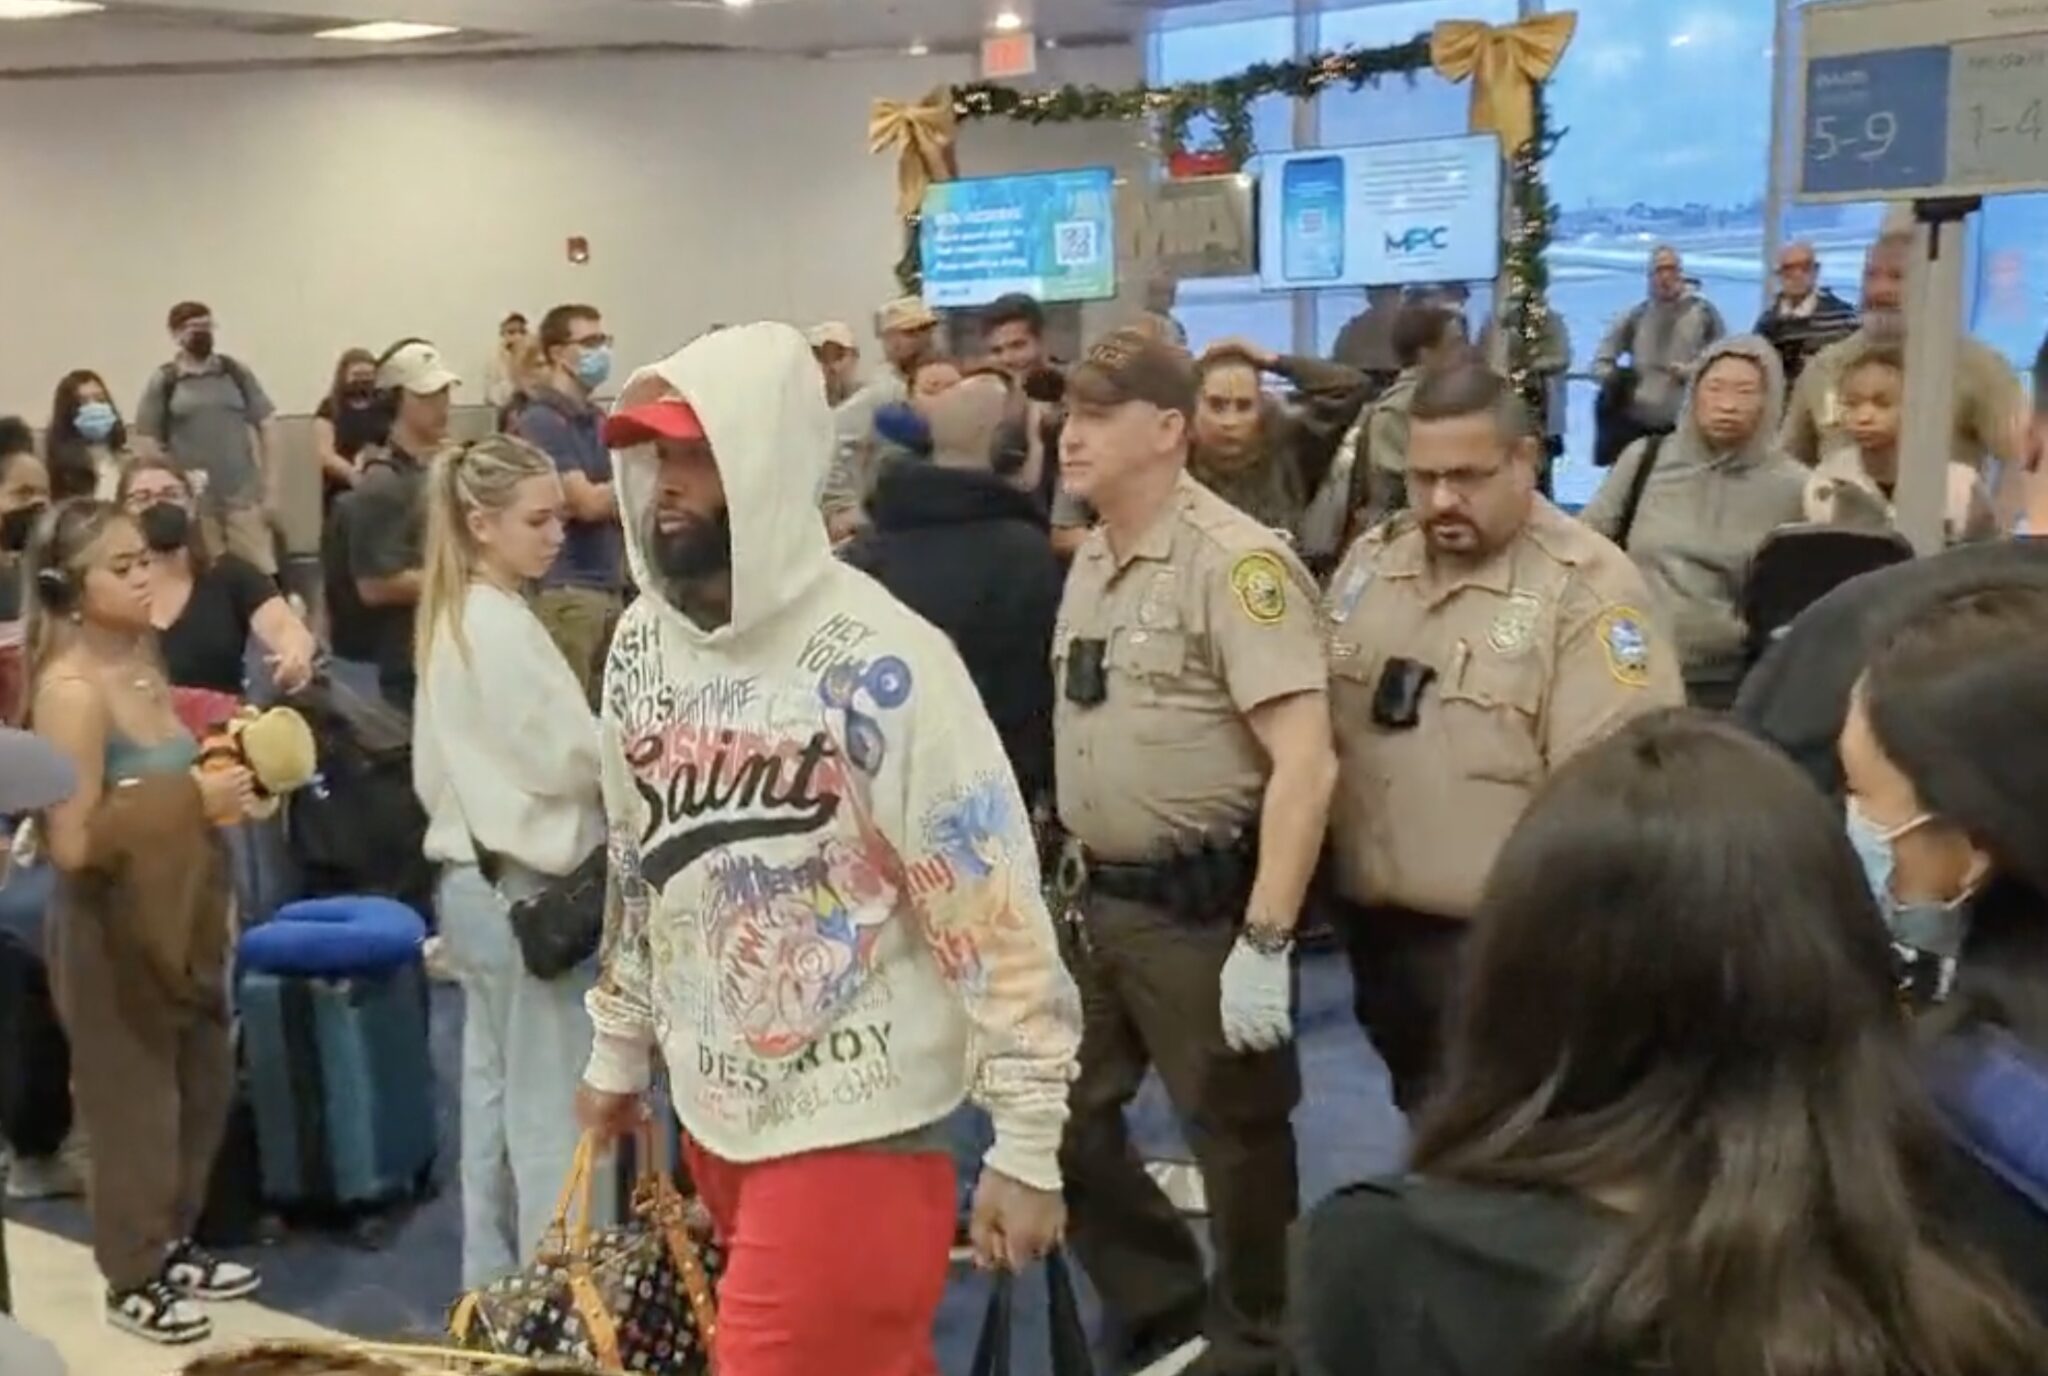 Odell Beckham Jr. Kicked Off Plane at Miami Airport After Reportedly Being ‘In and Out of Consciousness’ and Refusing Seat Belt (mediaite.com)